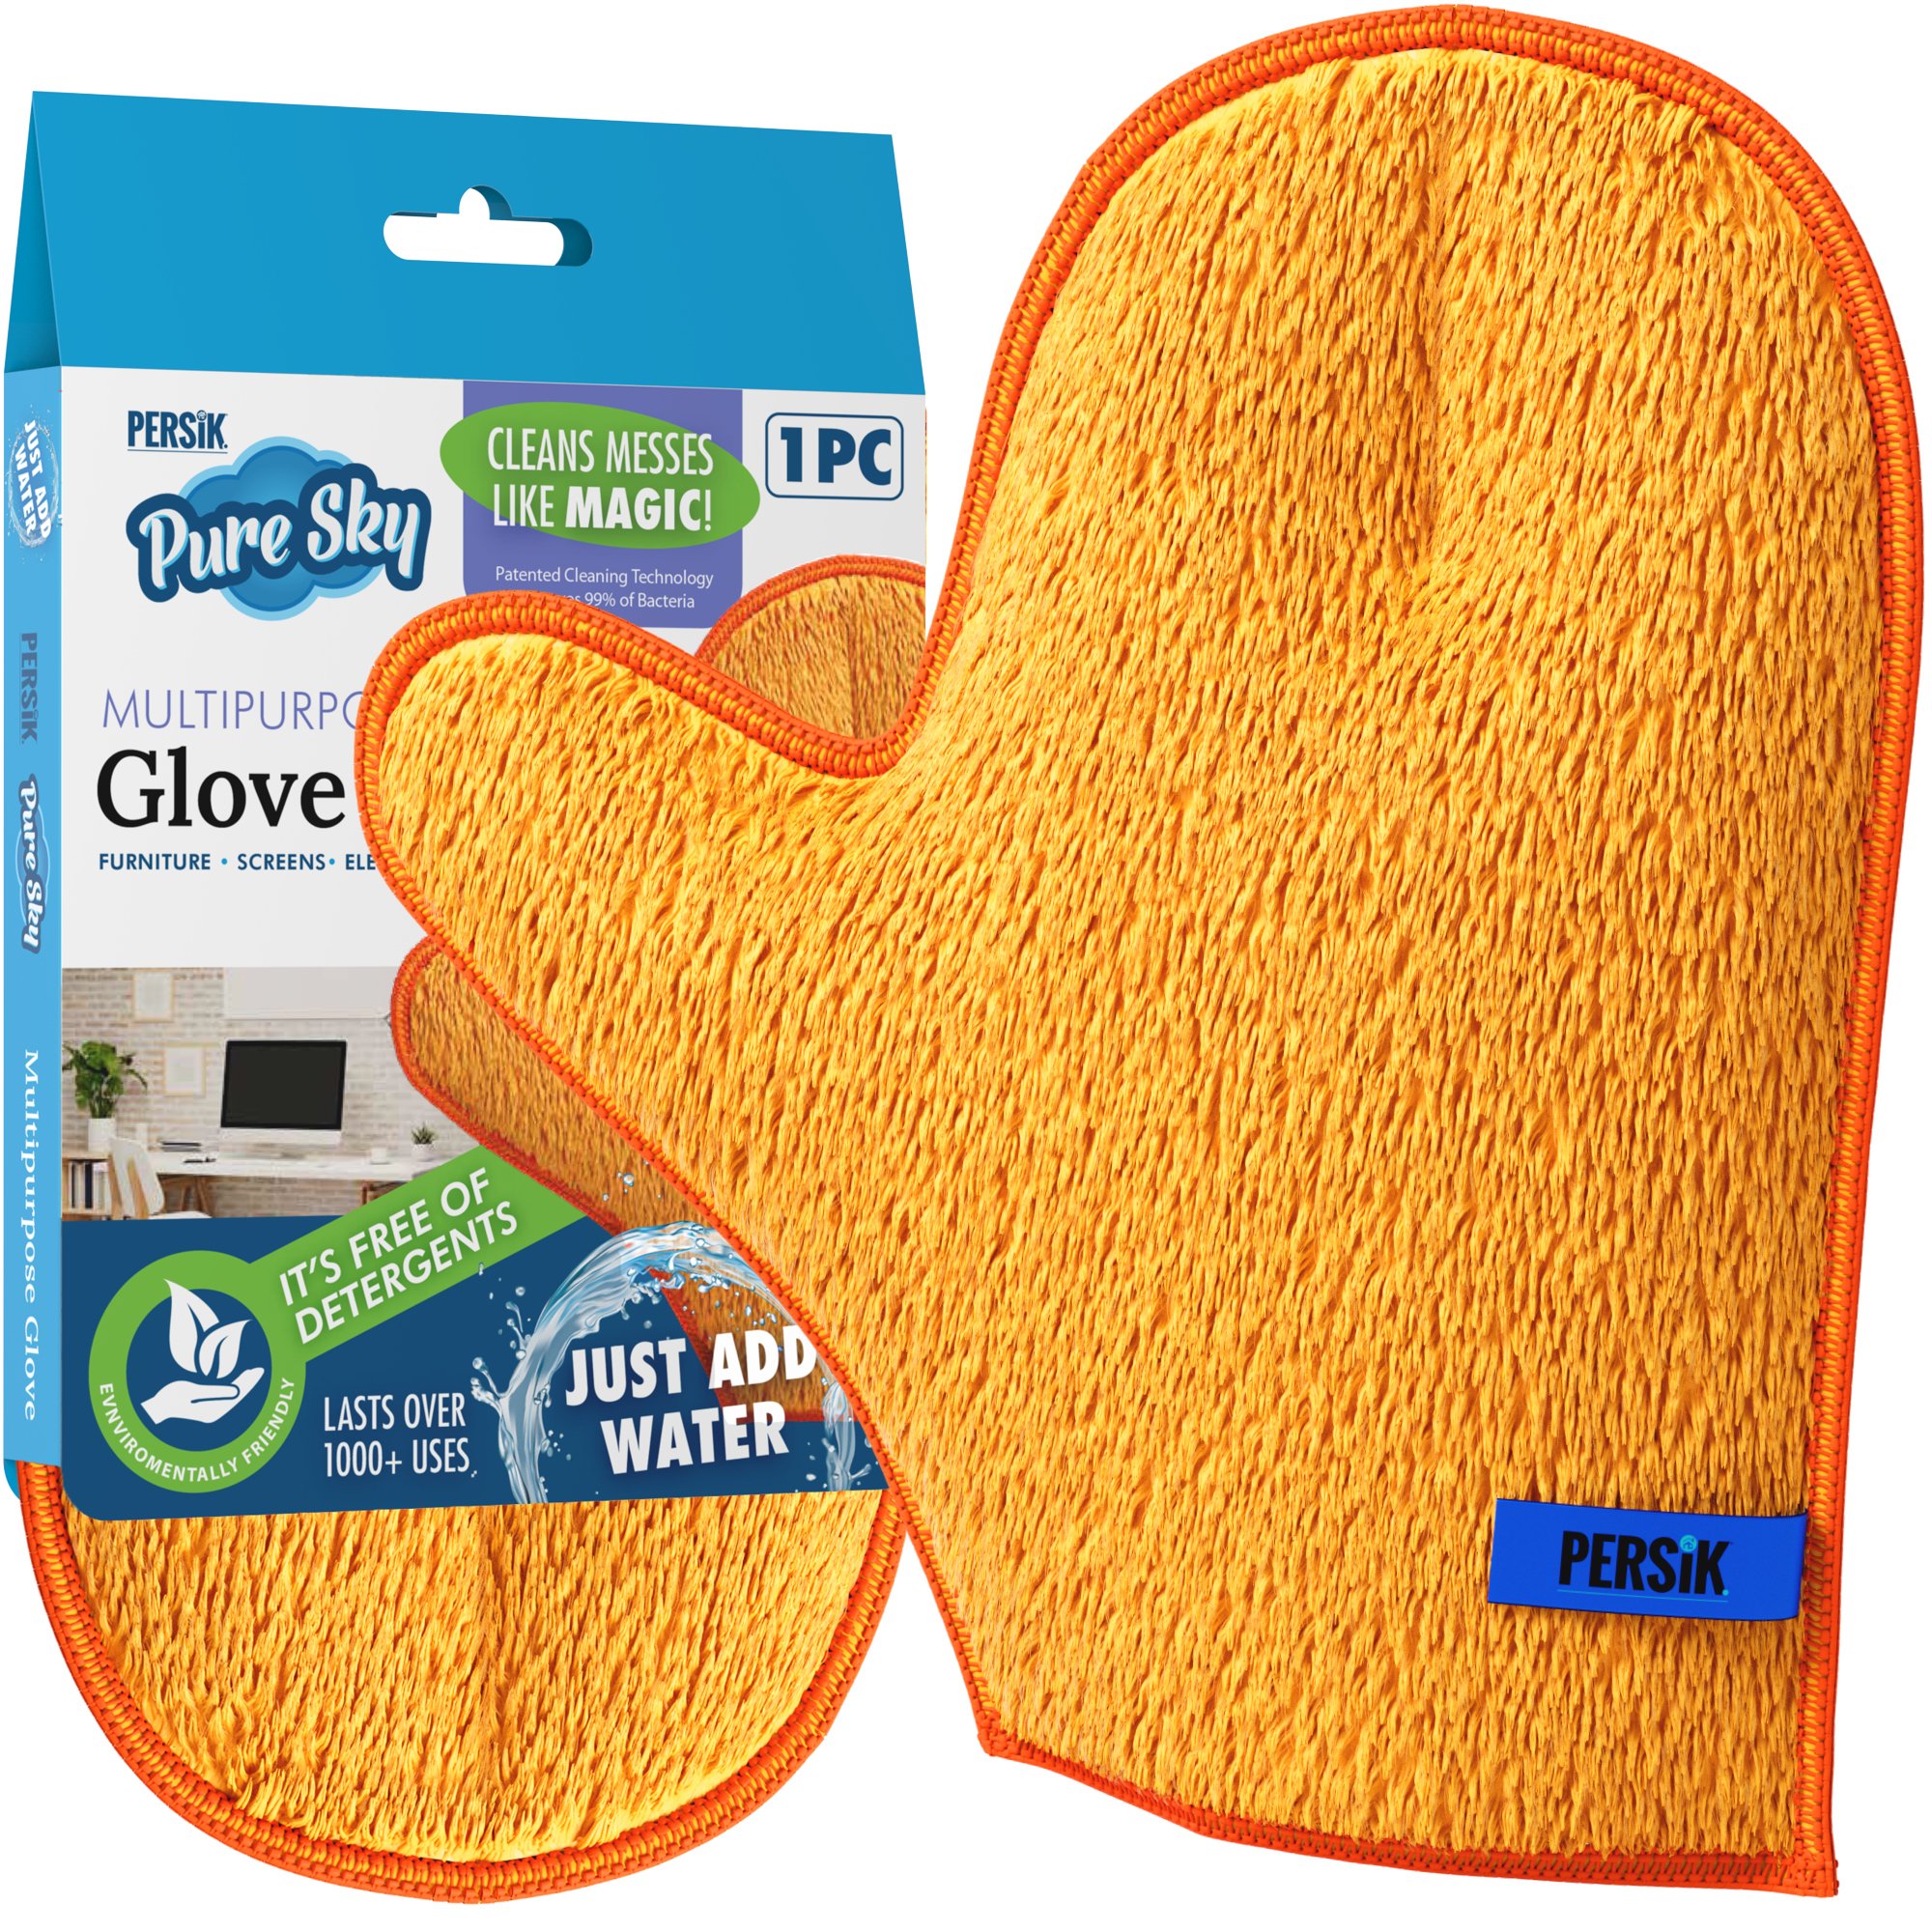 Pure-Sky Magic Microfiber Dusting MITT  Ultra Microfiber Cleaning Cloth Glove  JUST ADD Water No Detergents Needed  Use for Cleaning Furniture, Home Appliances, Screens, Electronics - image 1 of 9